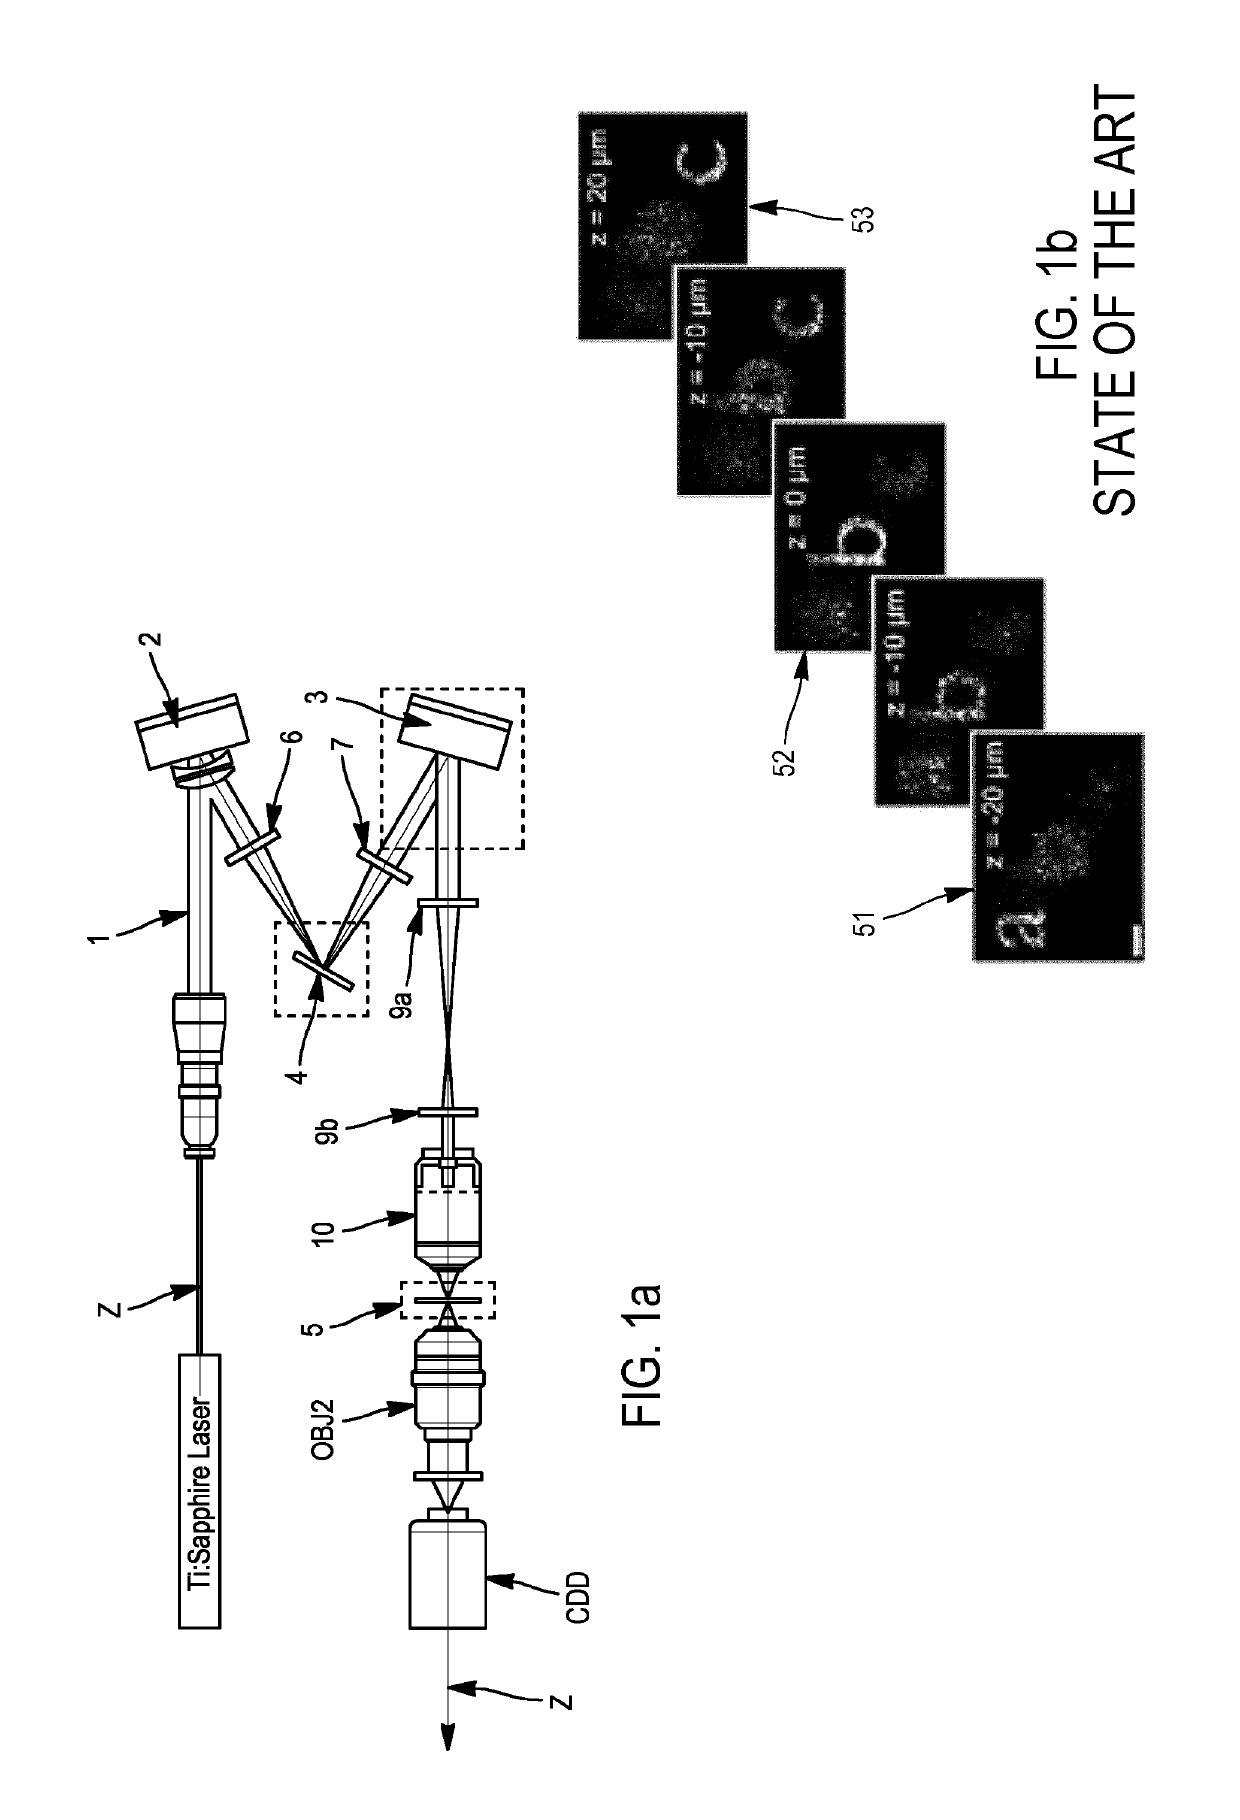 Optical system for shaping the wavefront of the electric field of an input light beam